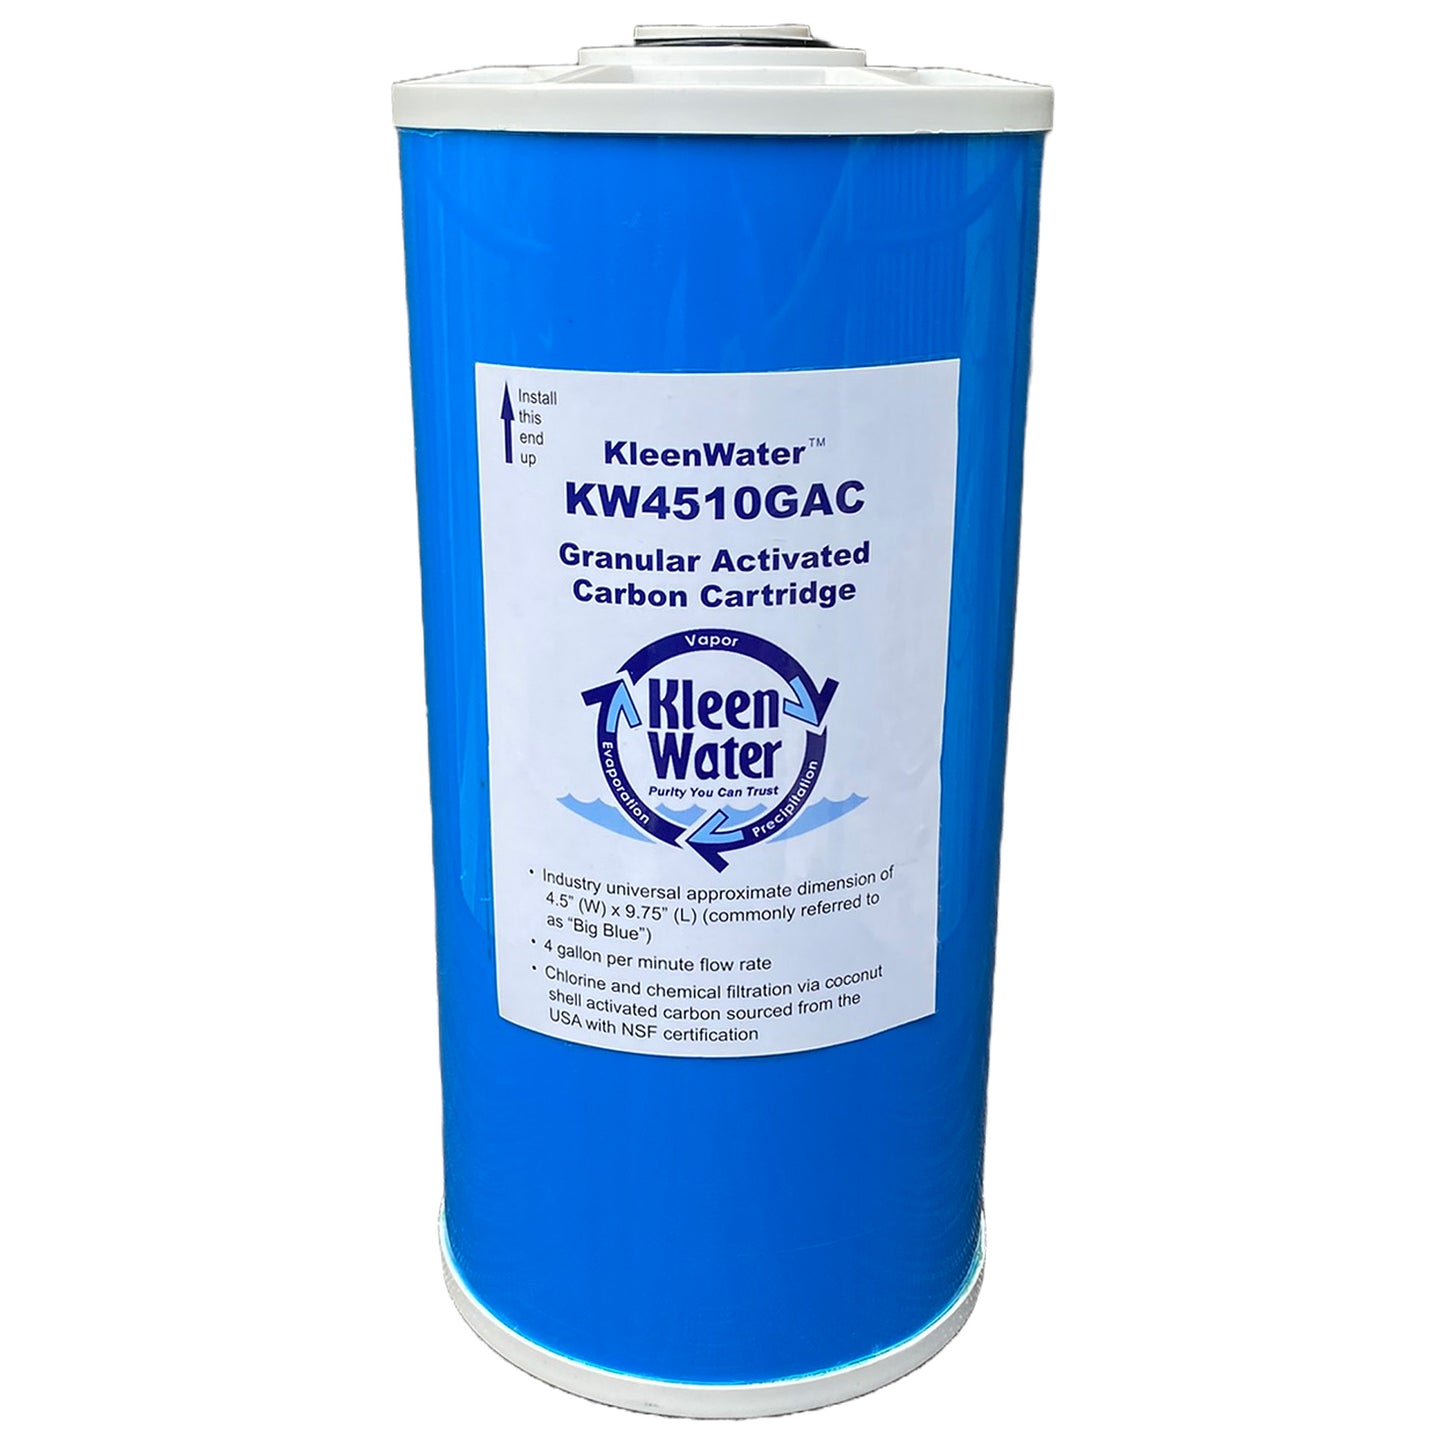 KleenWater Granular Activated Carbon Cartridge